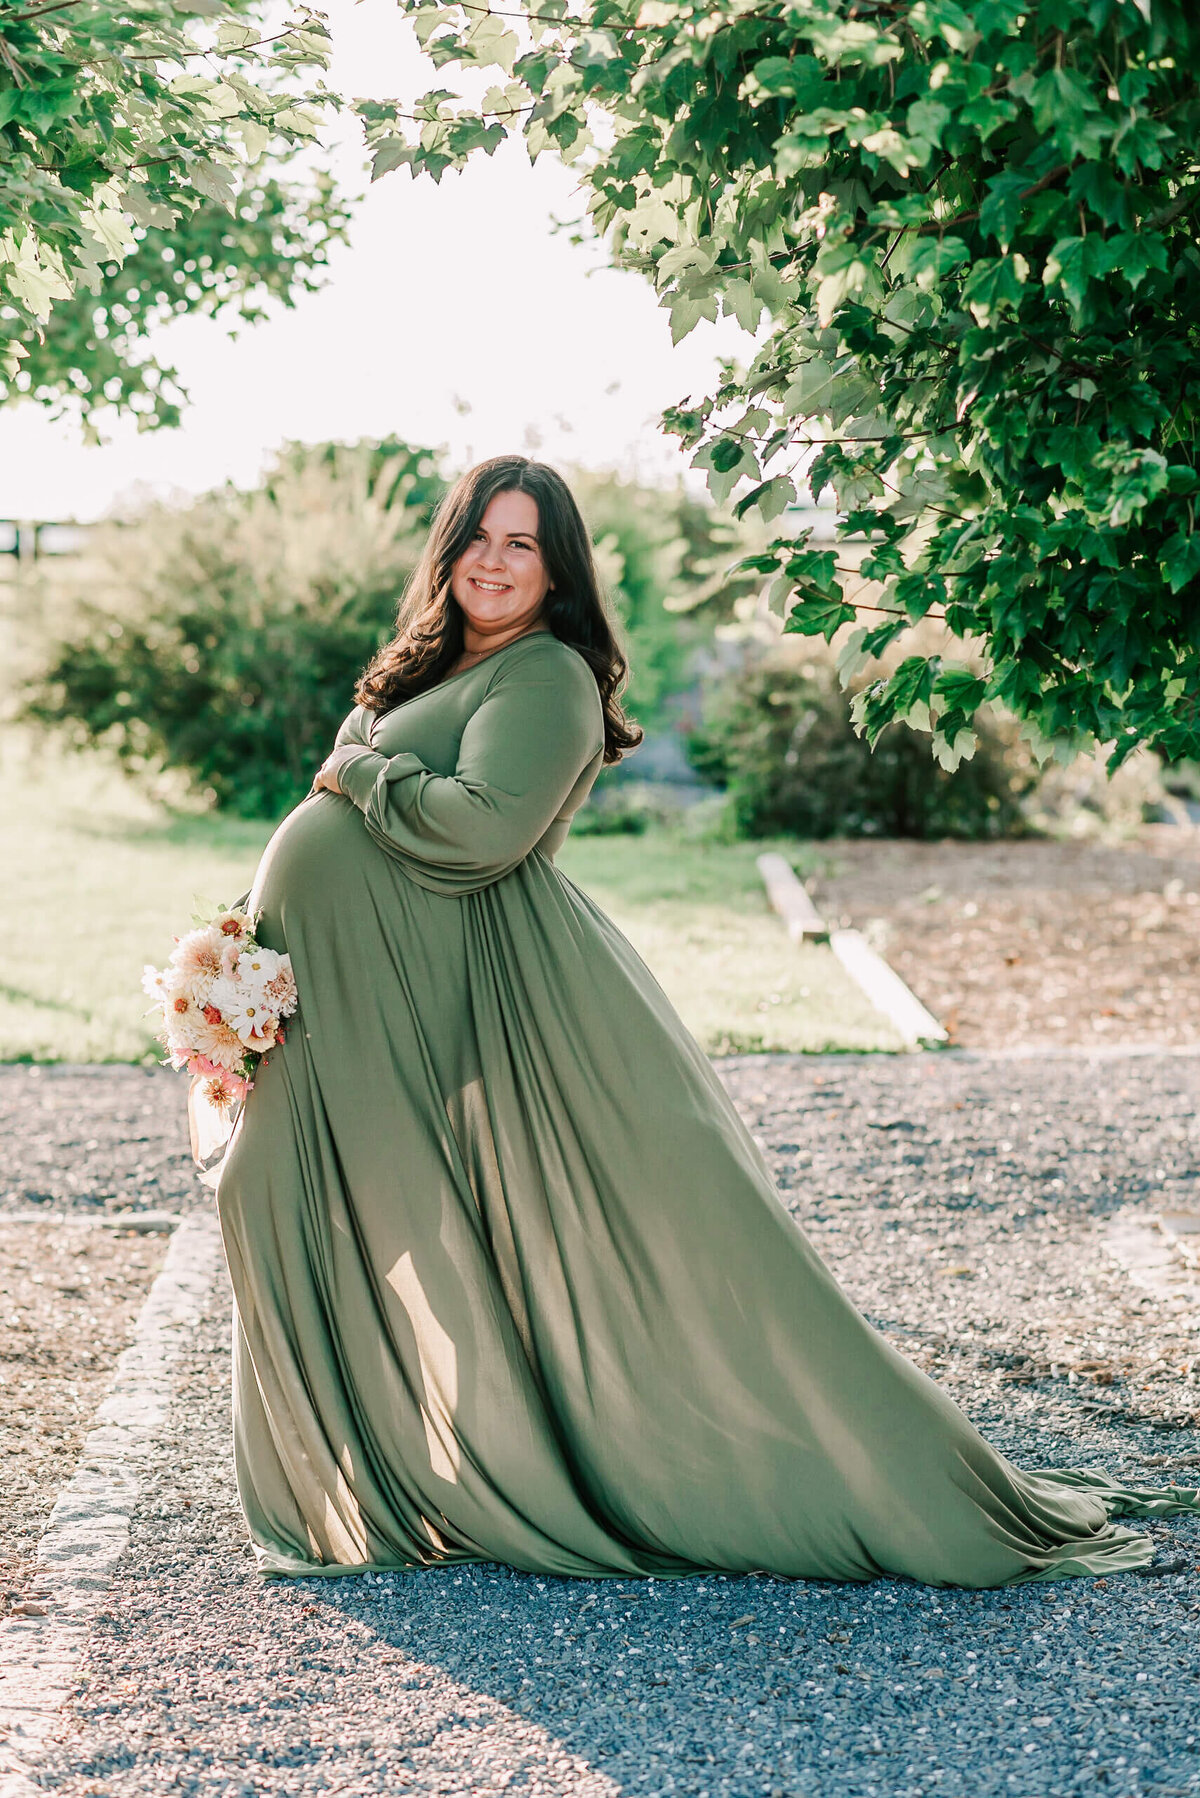 A pregnant mama wearing a green dress taken by denise van photography, a northern virginia maternity photographer